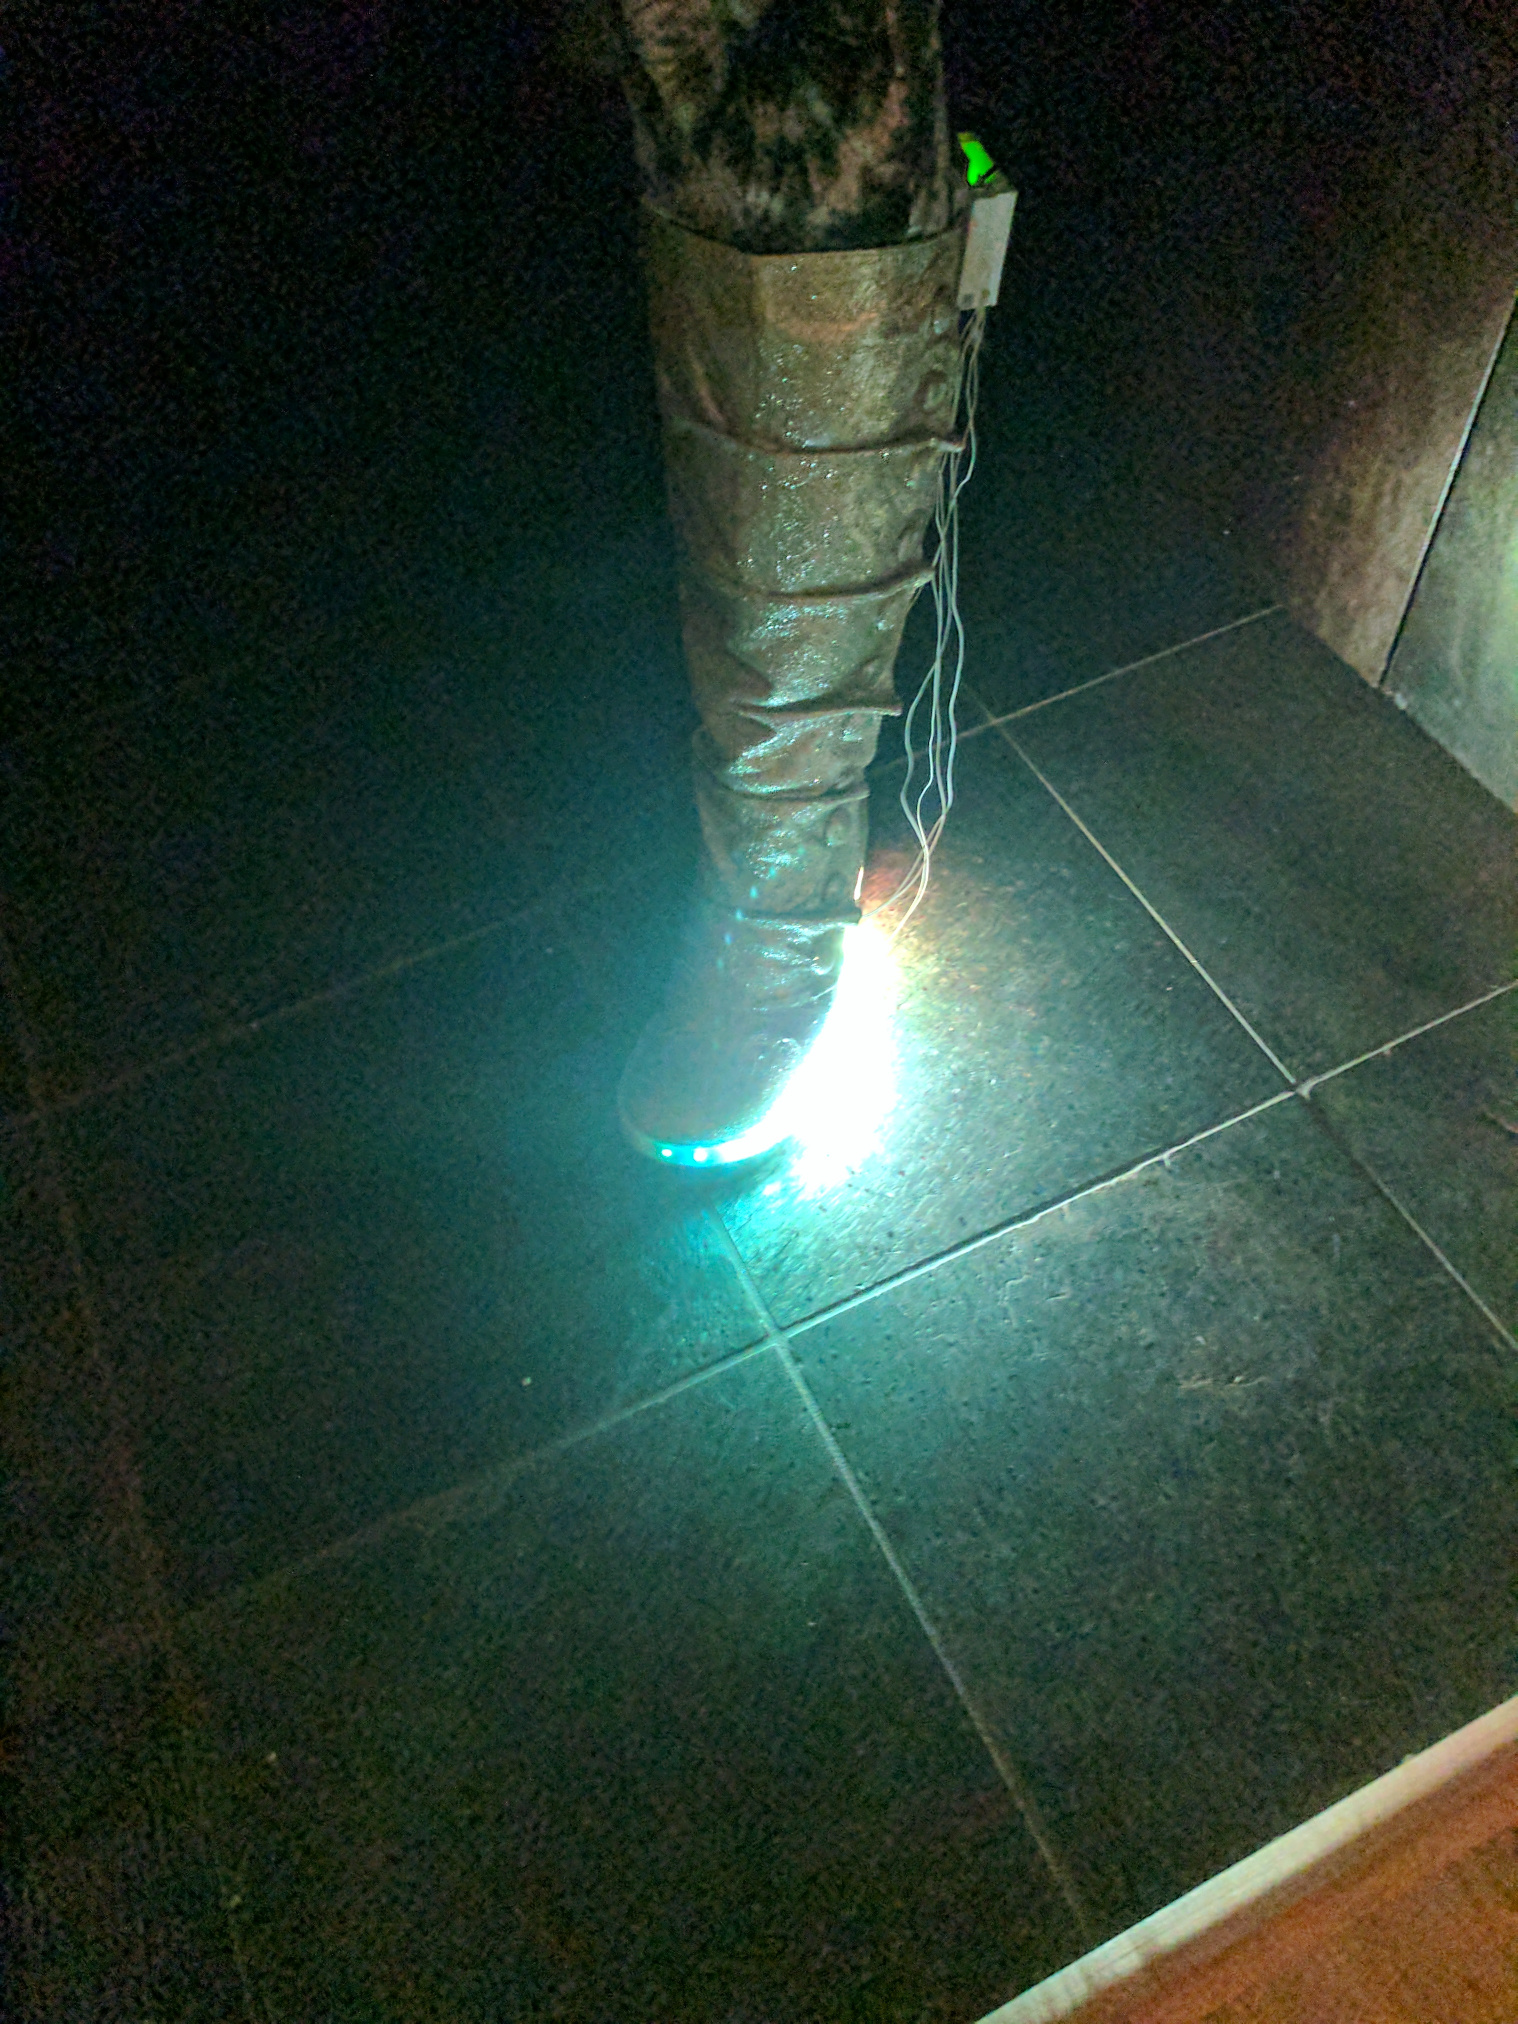 A leg, wearing a gold glitter covered calf high boot with LEDs along the base and a home made electronics enclosure on the back.  Wires hang loose. The LEDs glow white.